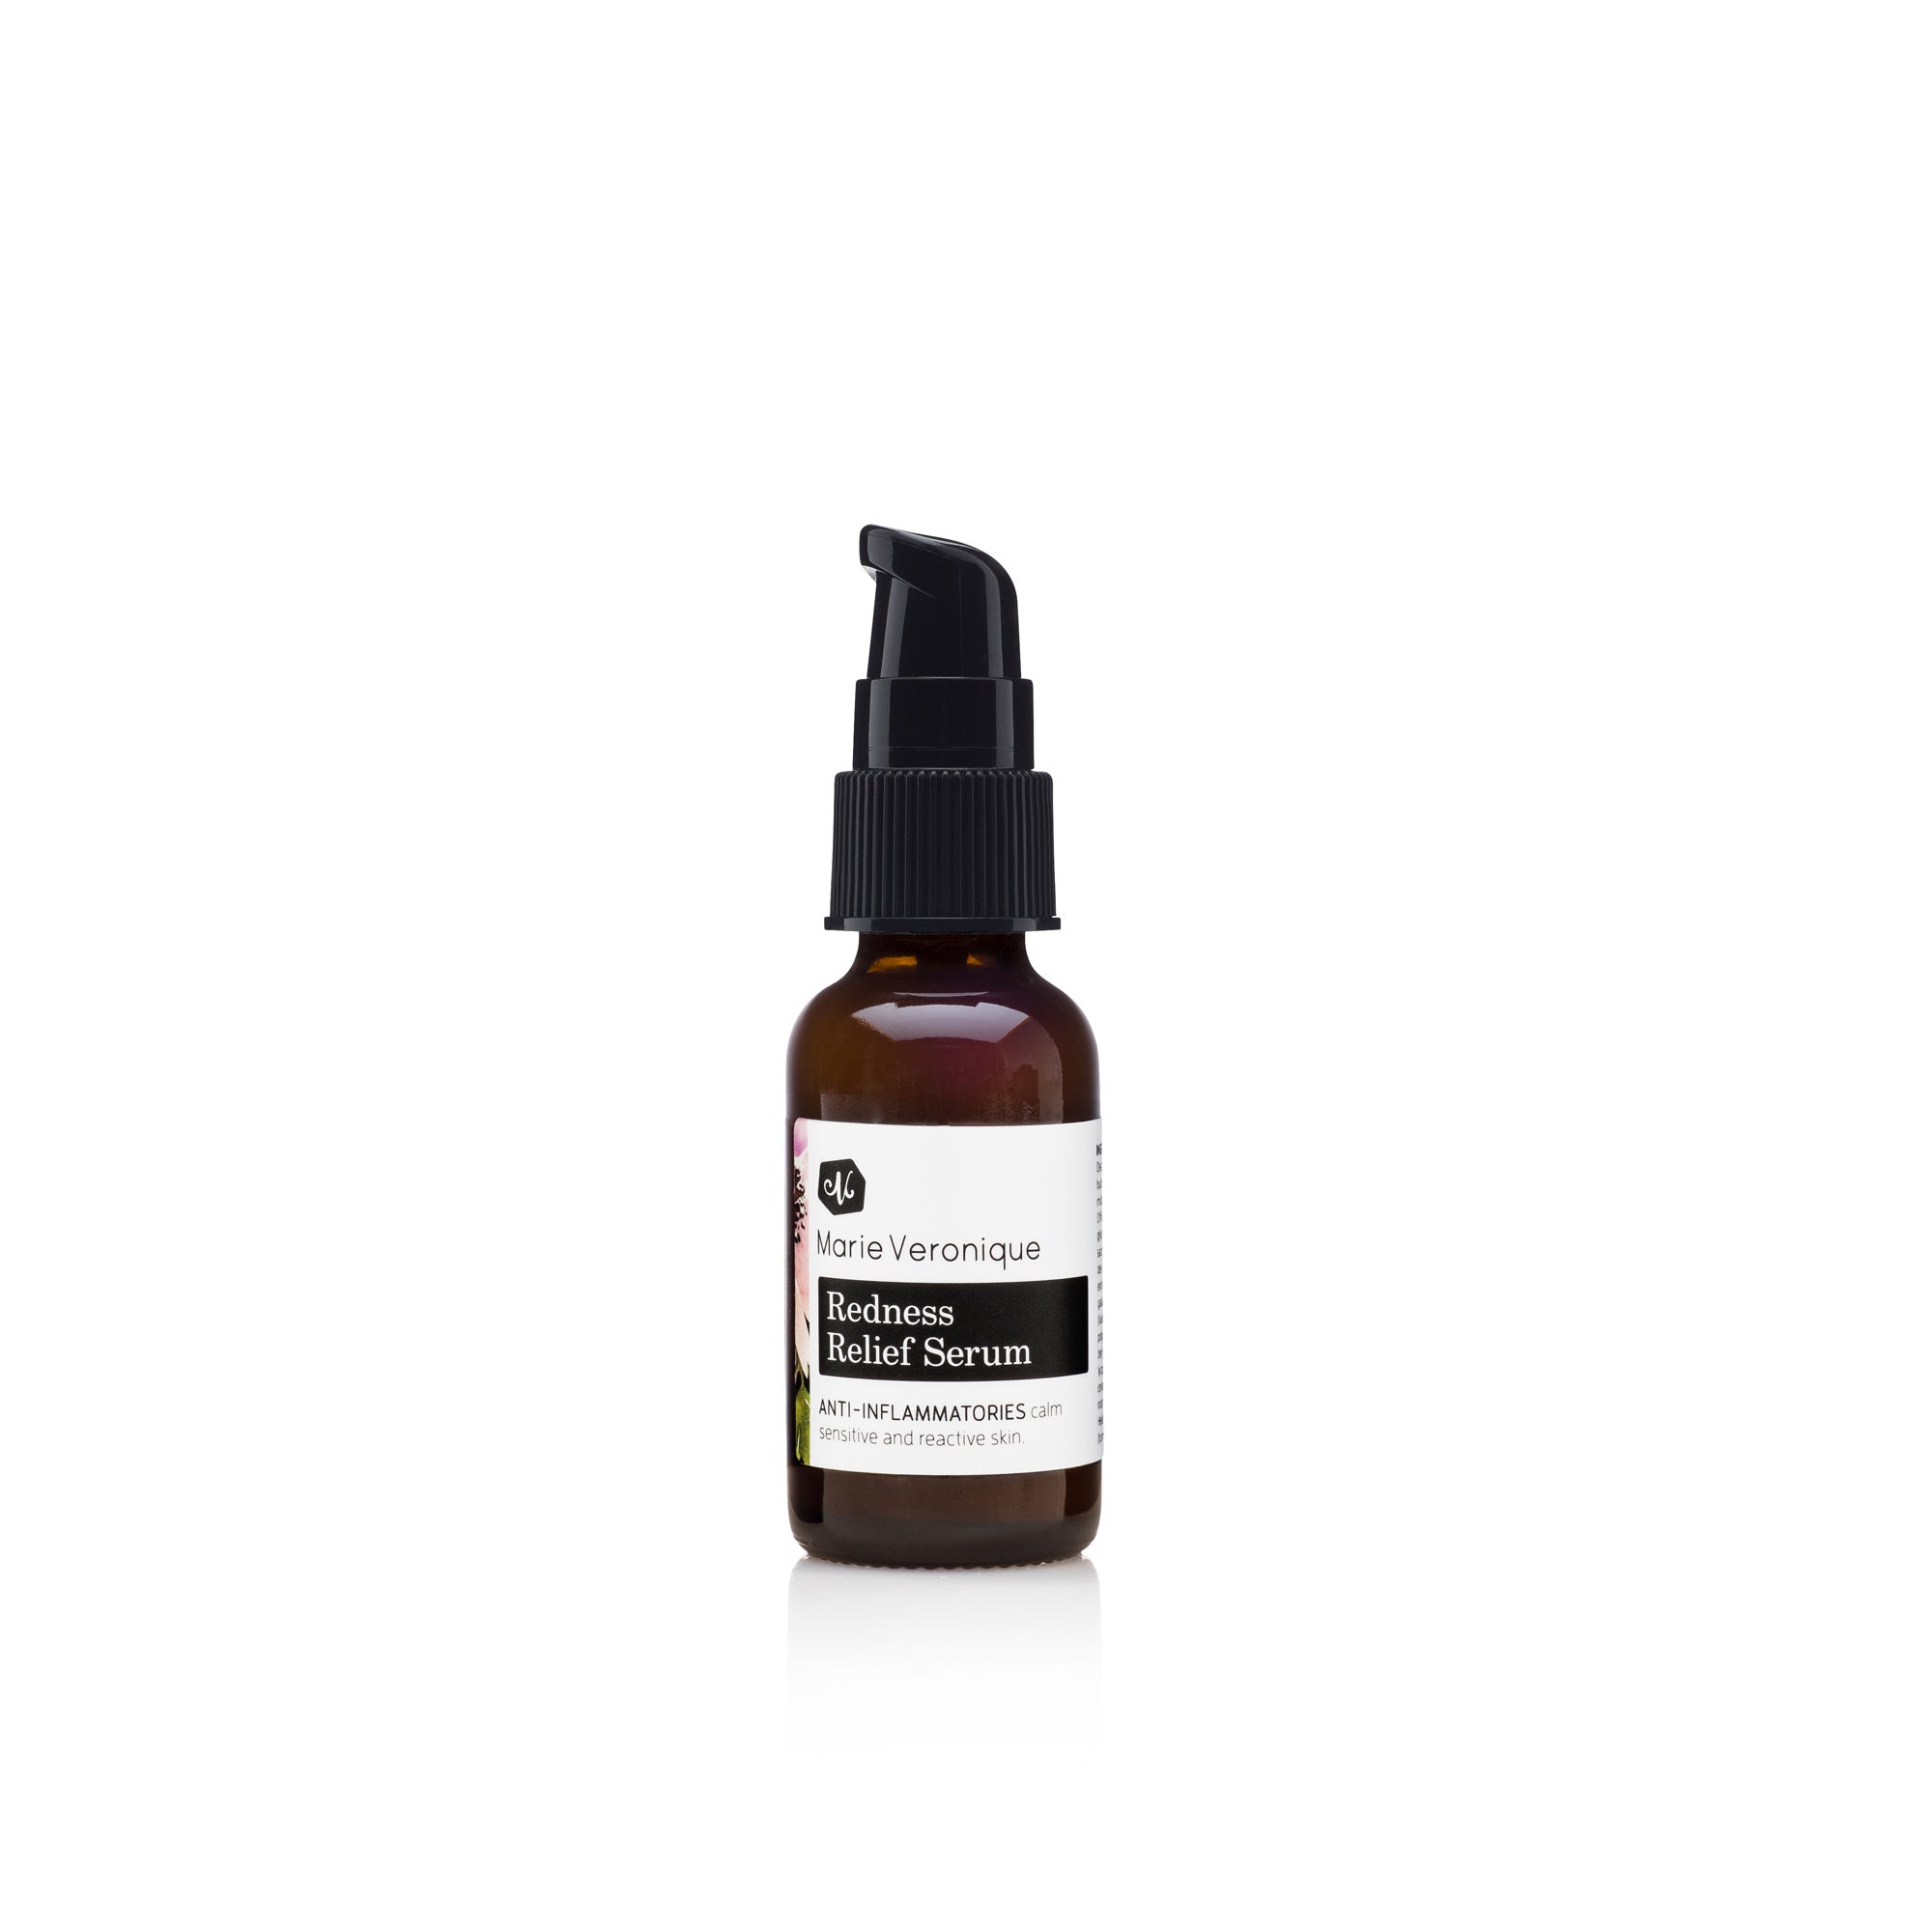 Marie Veronique Redness Relief Serum 1 oz / 30 ml. Calm reactive skin and minimize flushing with SODIUM SALICYLATE.